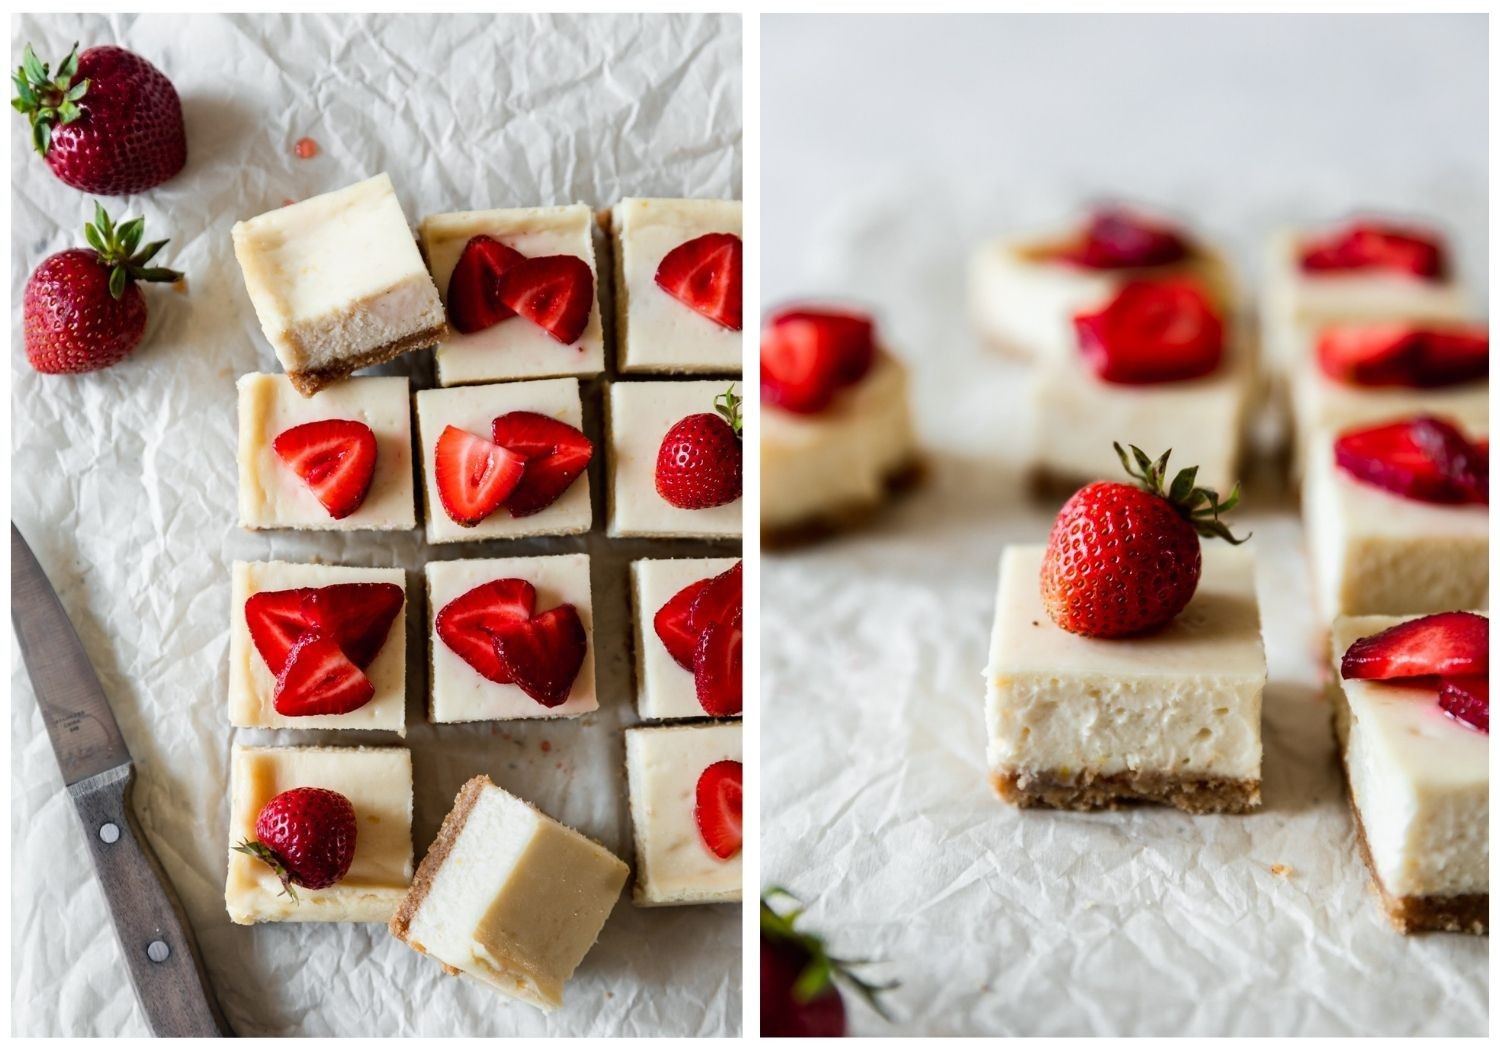 Two images; on the left, an overhead picture of rows of cheesecake bars topped with strawberries on white parchment paper next to a wooden knife. On the right, a side image of a bar with a whole strawberry on top next to rows of bars on a white background.